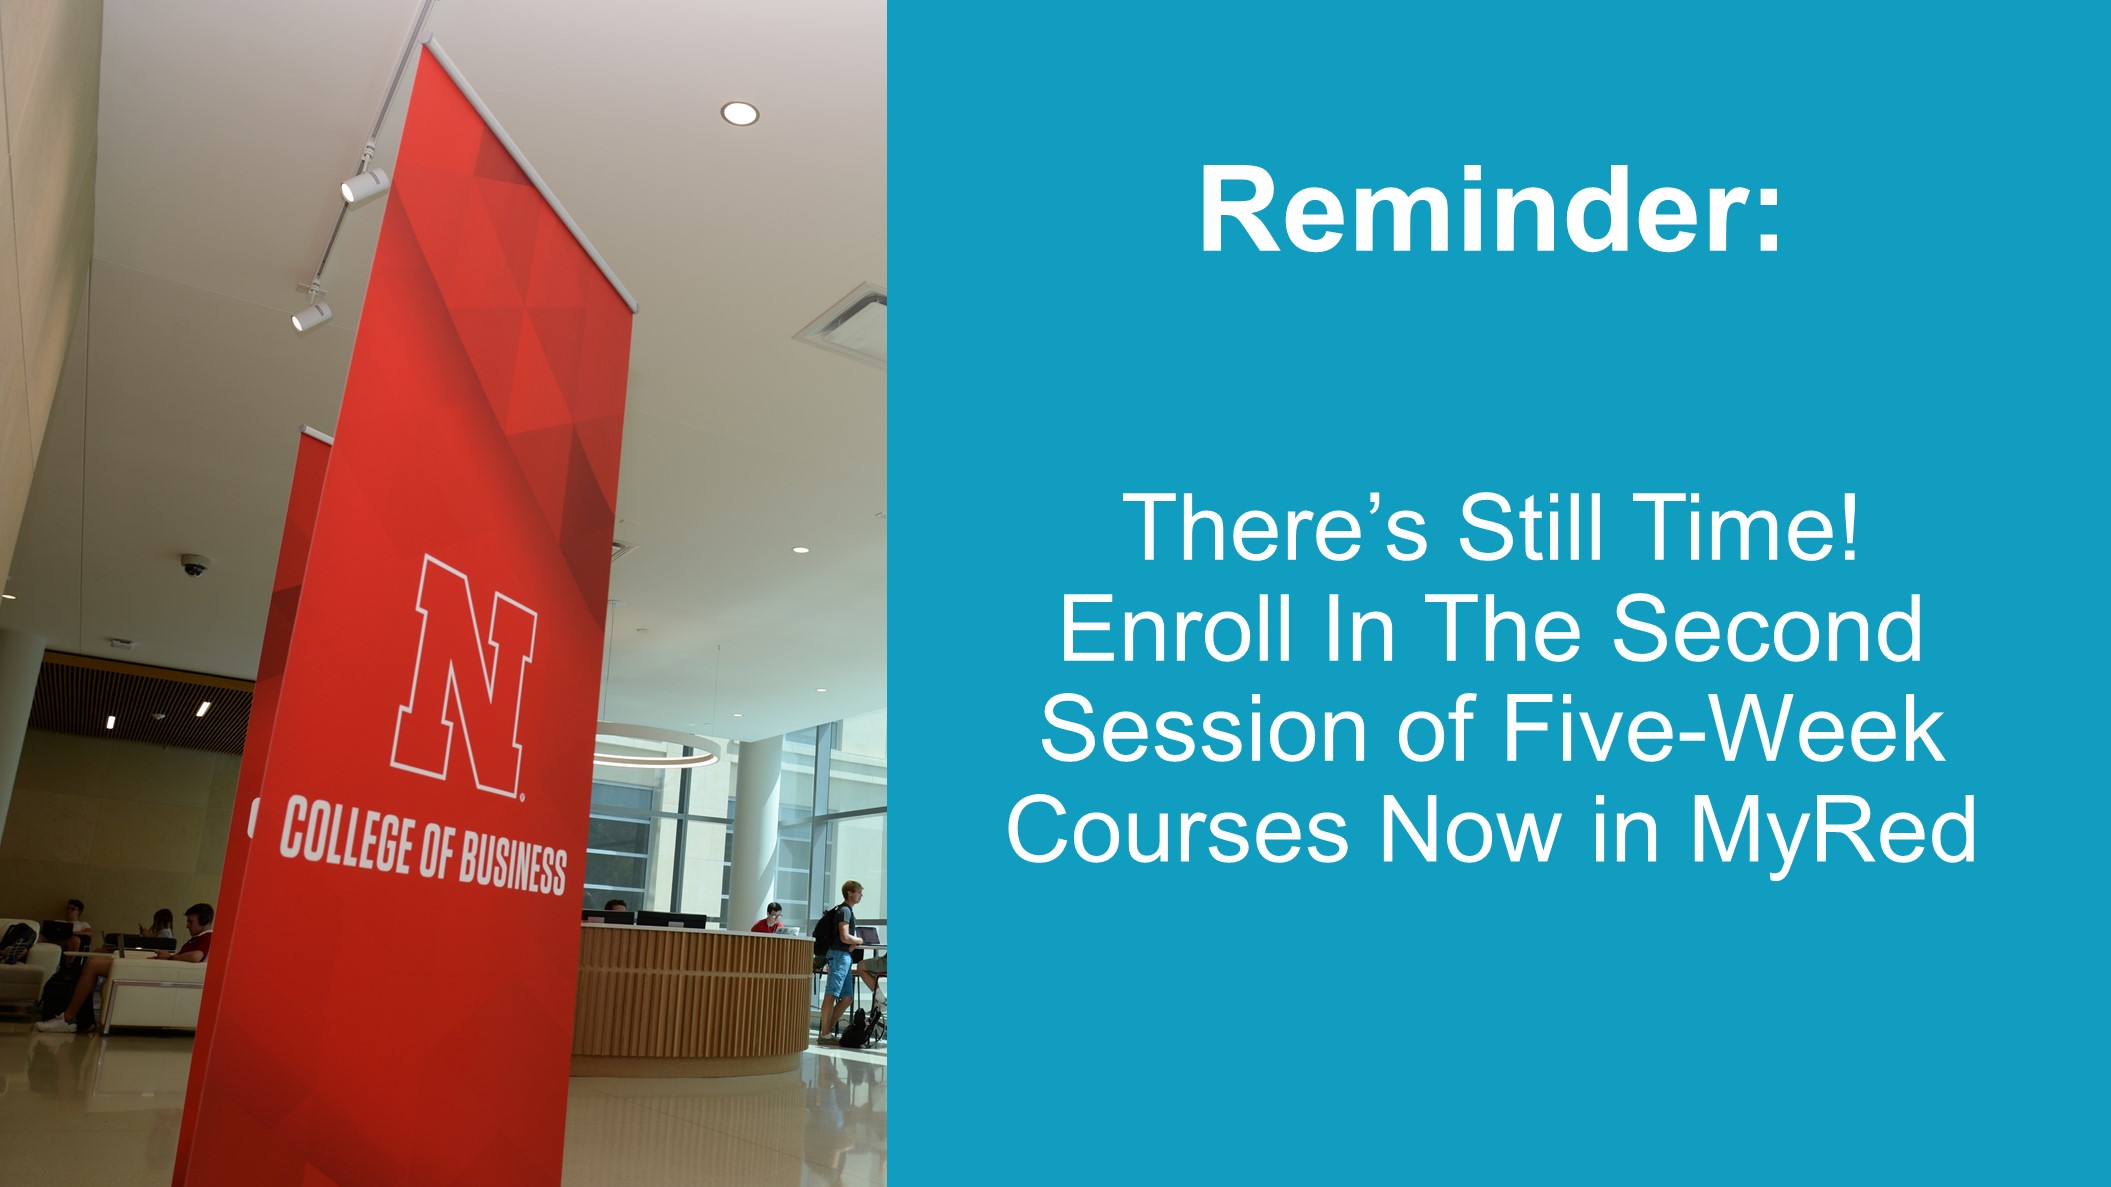 Still time to enroll in 2nd 5-week courses!